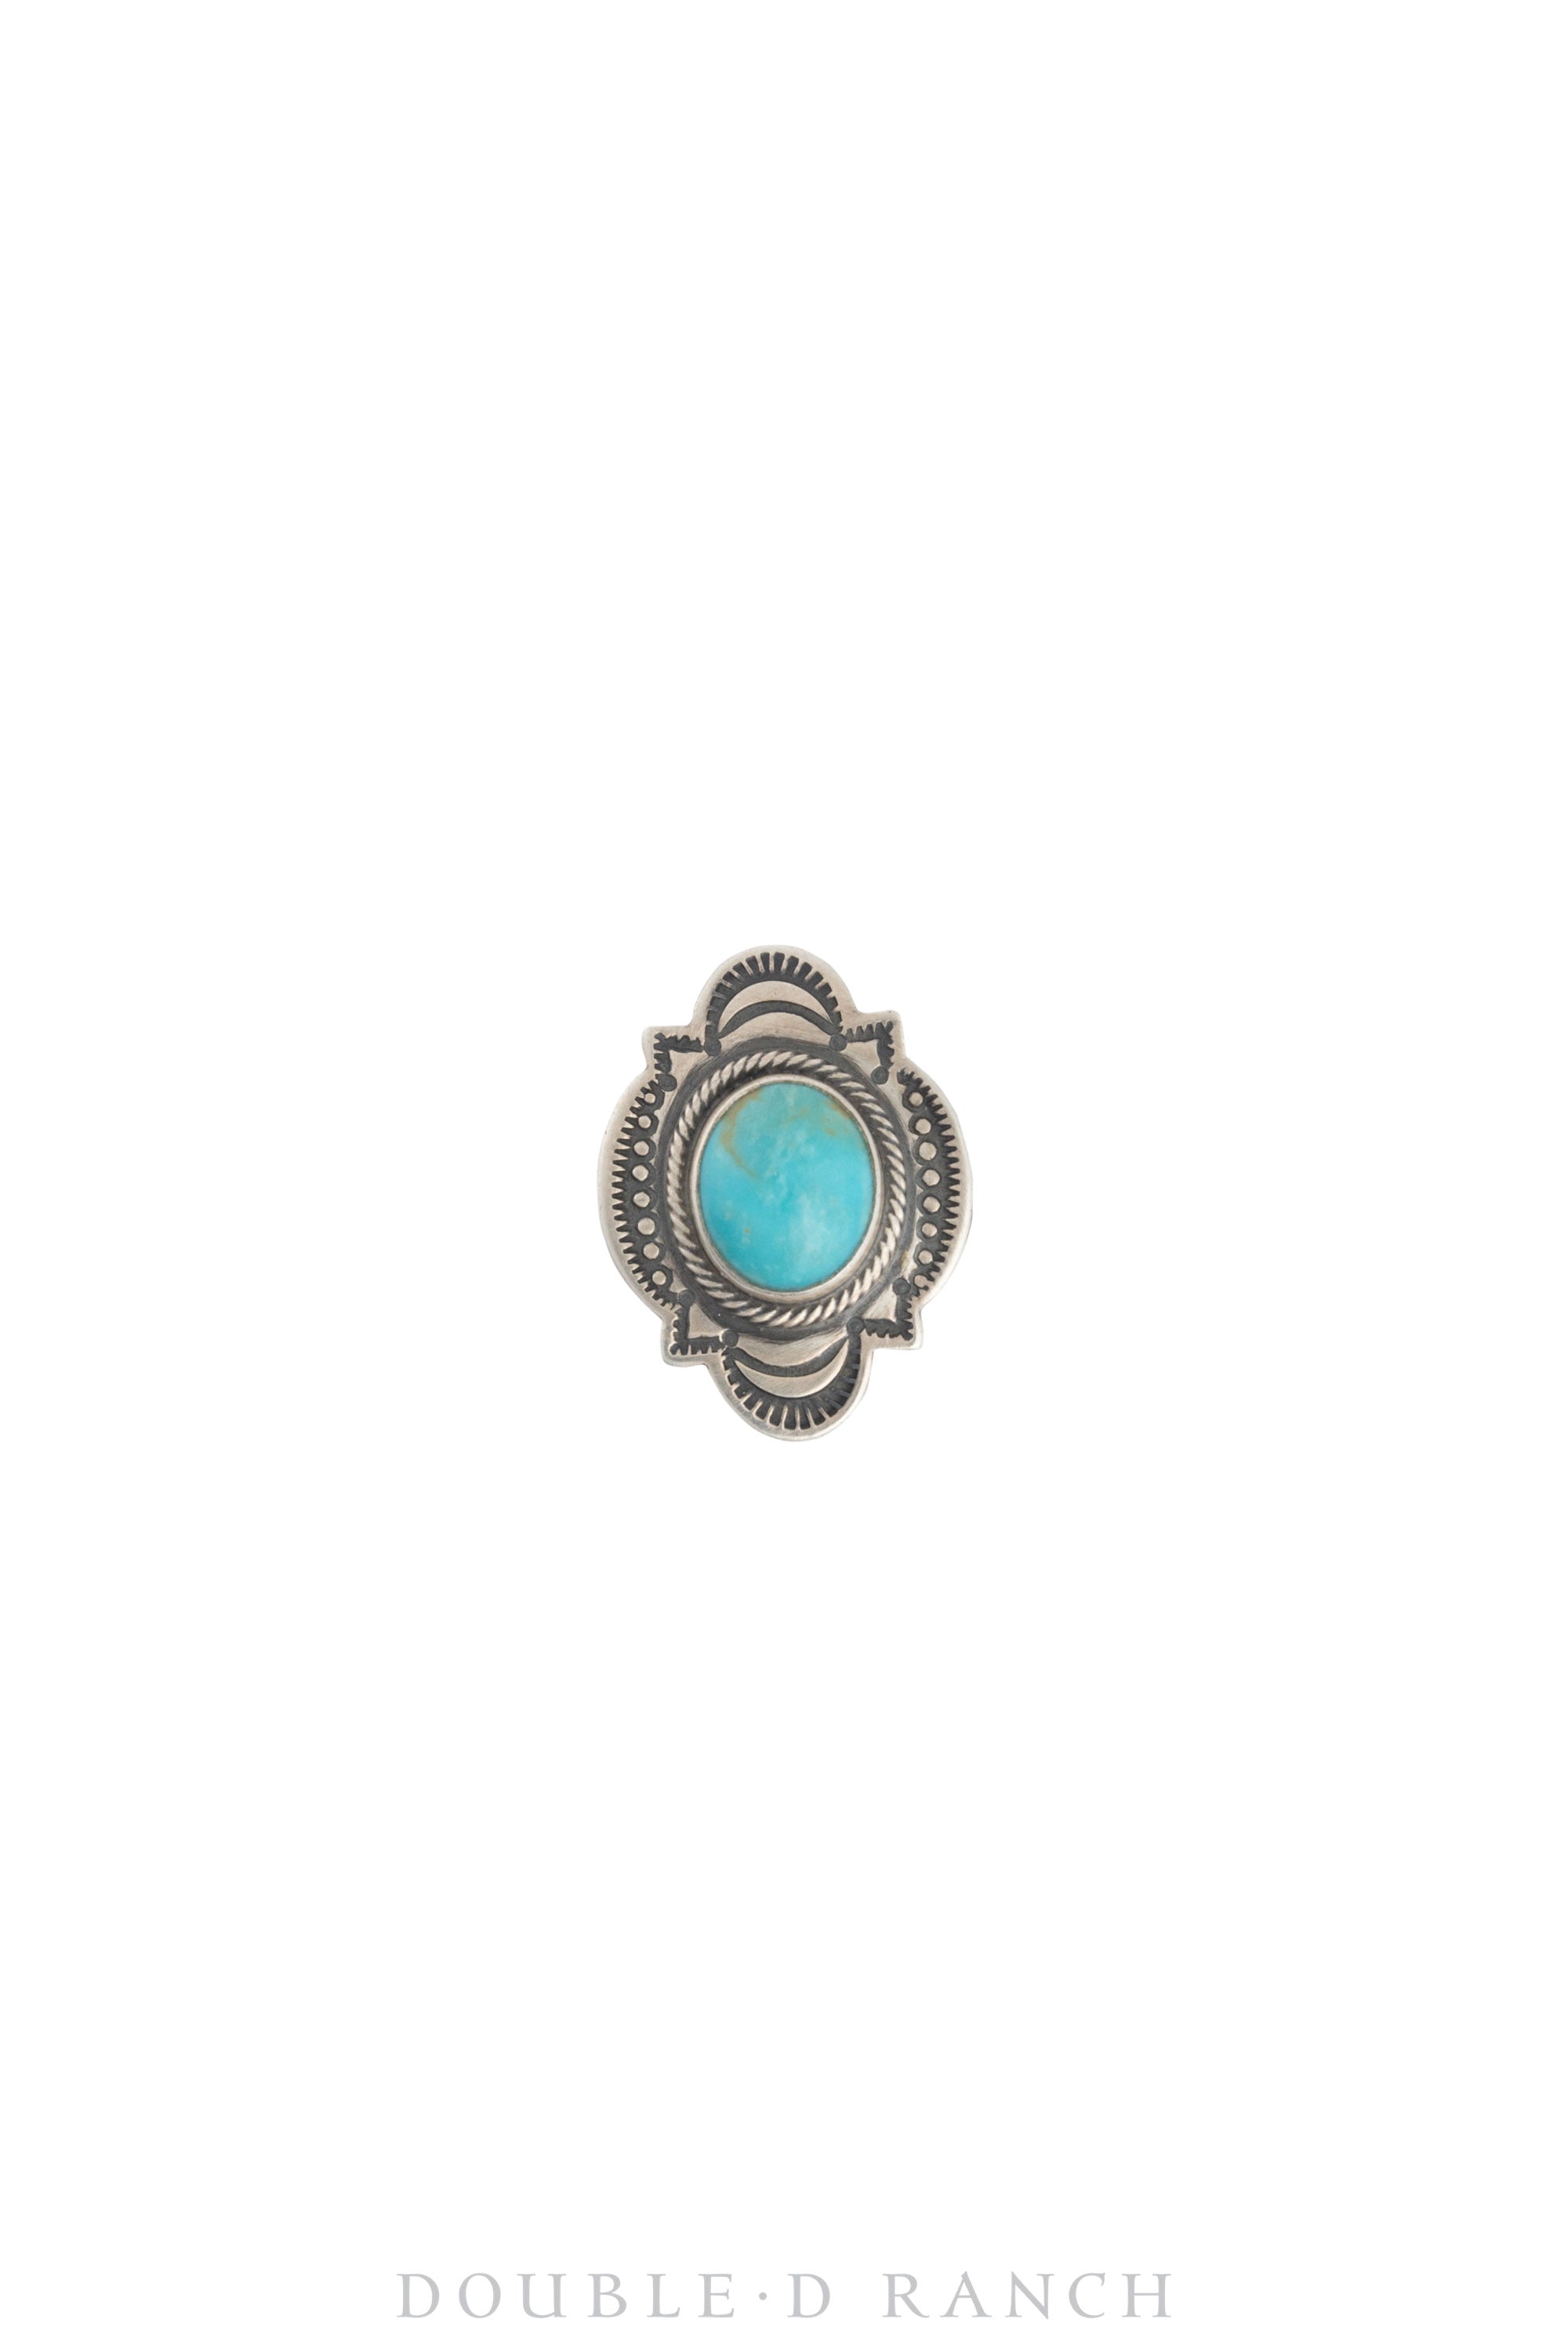 Ring, Natural Stone, Turquoise, Hallmark, Contemporary, 1380